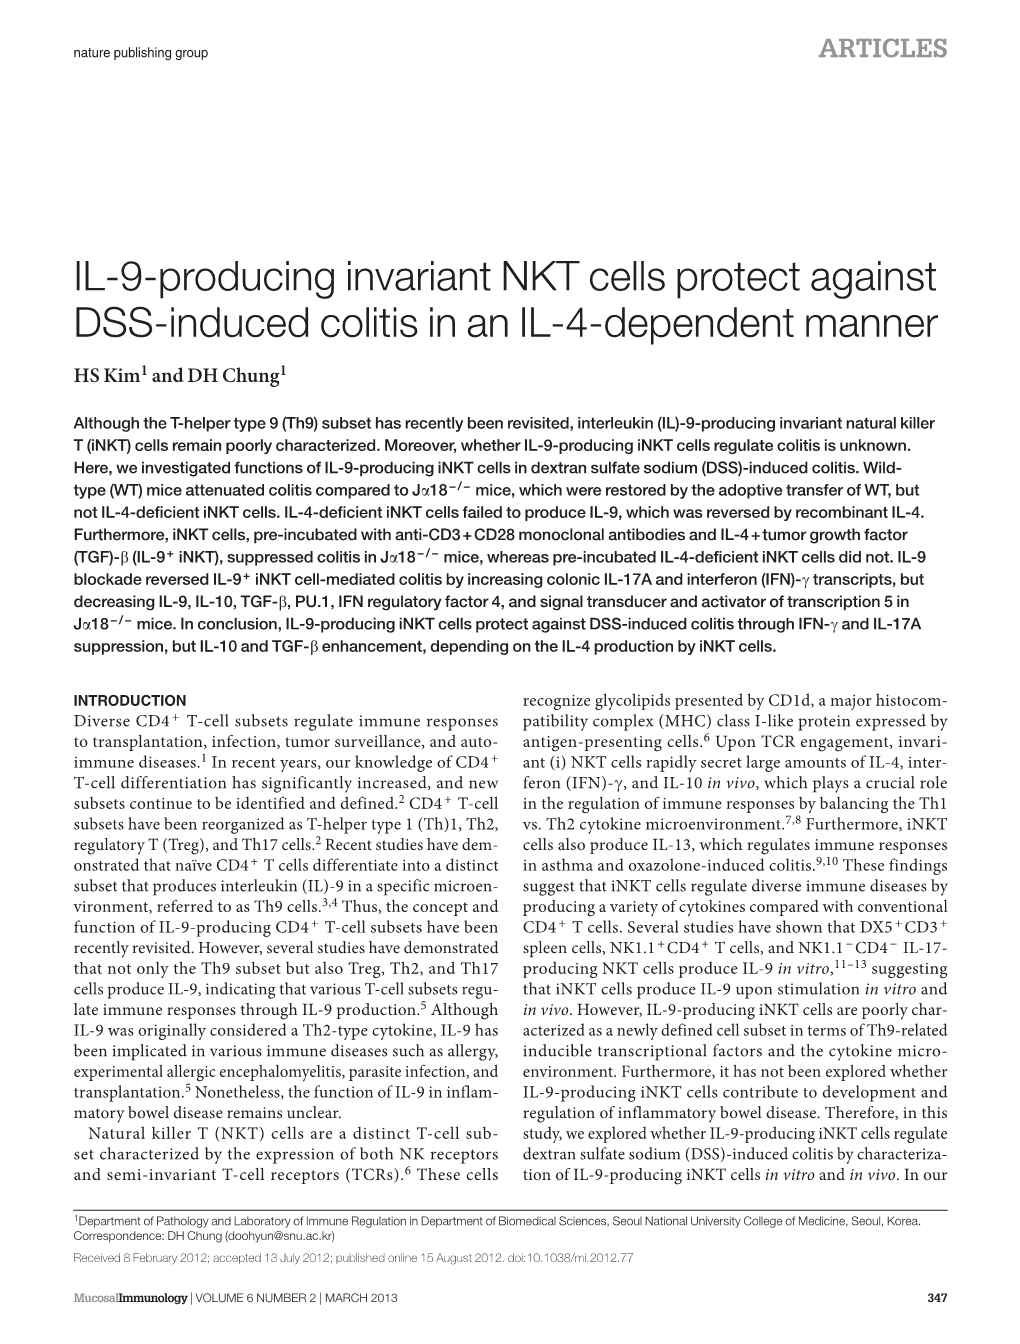 IL-9-Producing Invariant NKT Cells Protect Against DSS-Induced Colitis in an IL-4-Dependent Manner